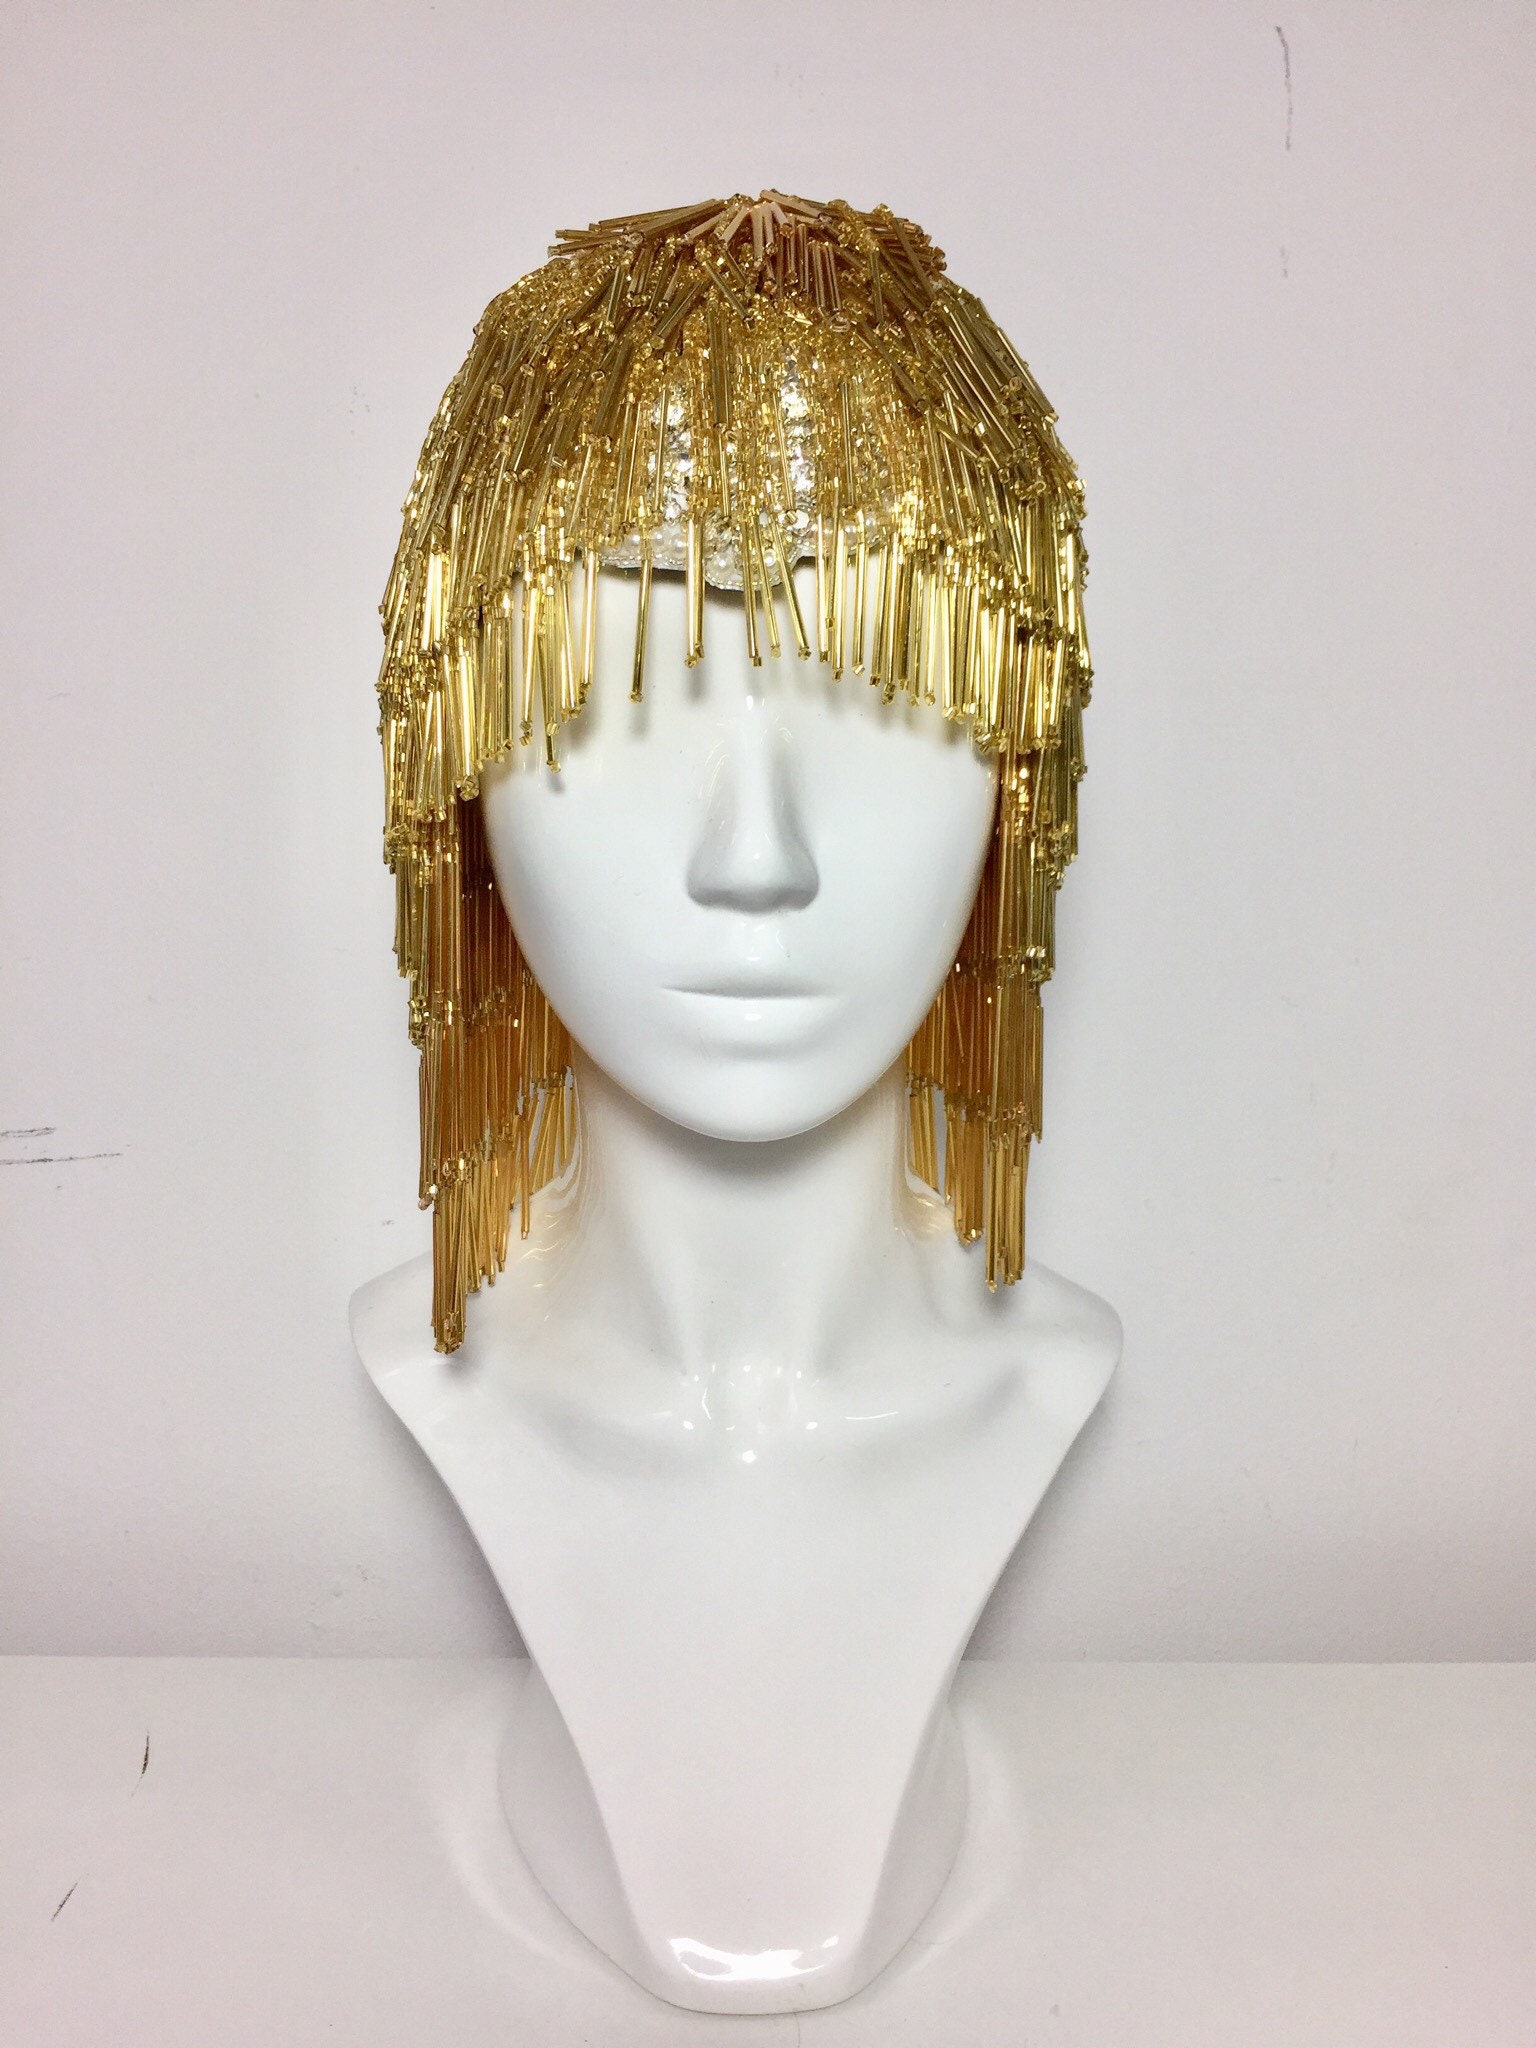 Gilding Wax Renaissance Gold - Cosplay wig general specialty store Assist  Wig ONLINE SHOP